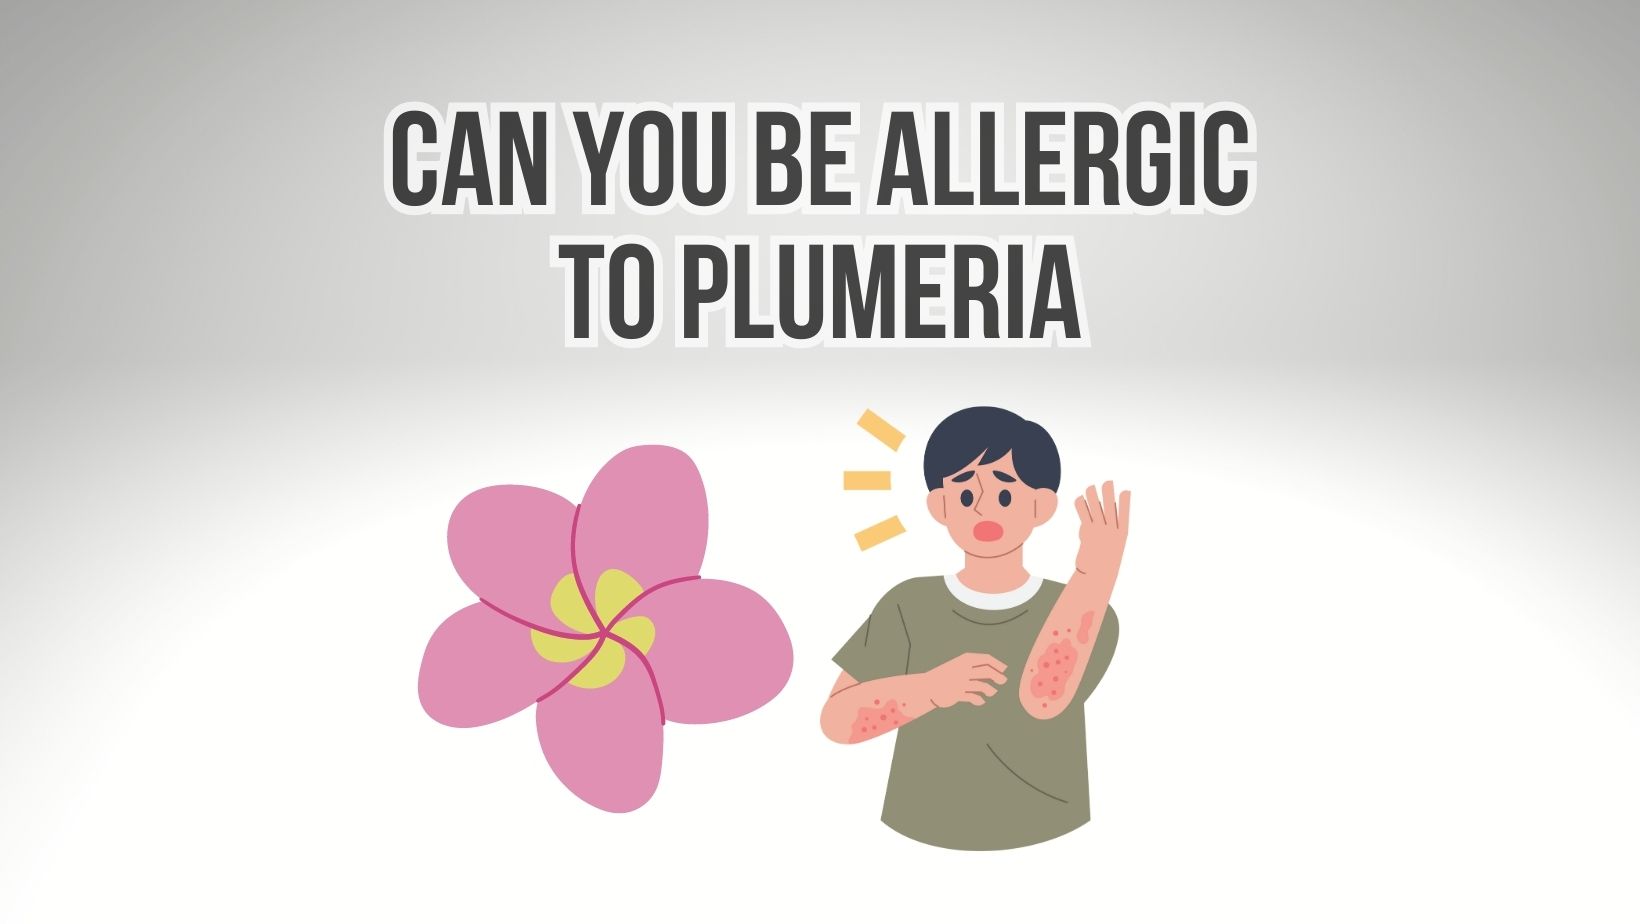 Can You Be Allergic to Plumeria